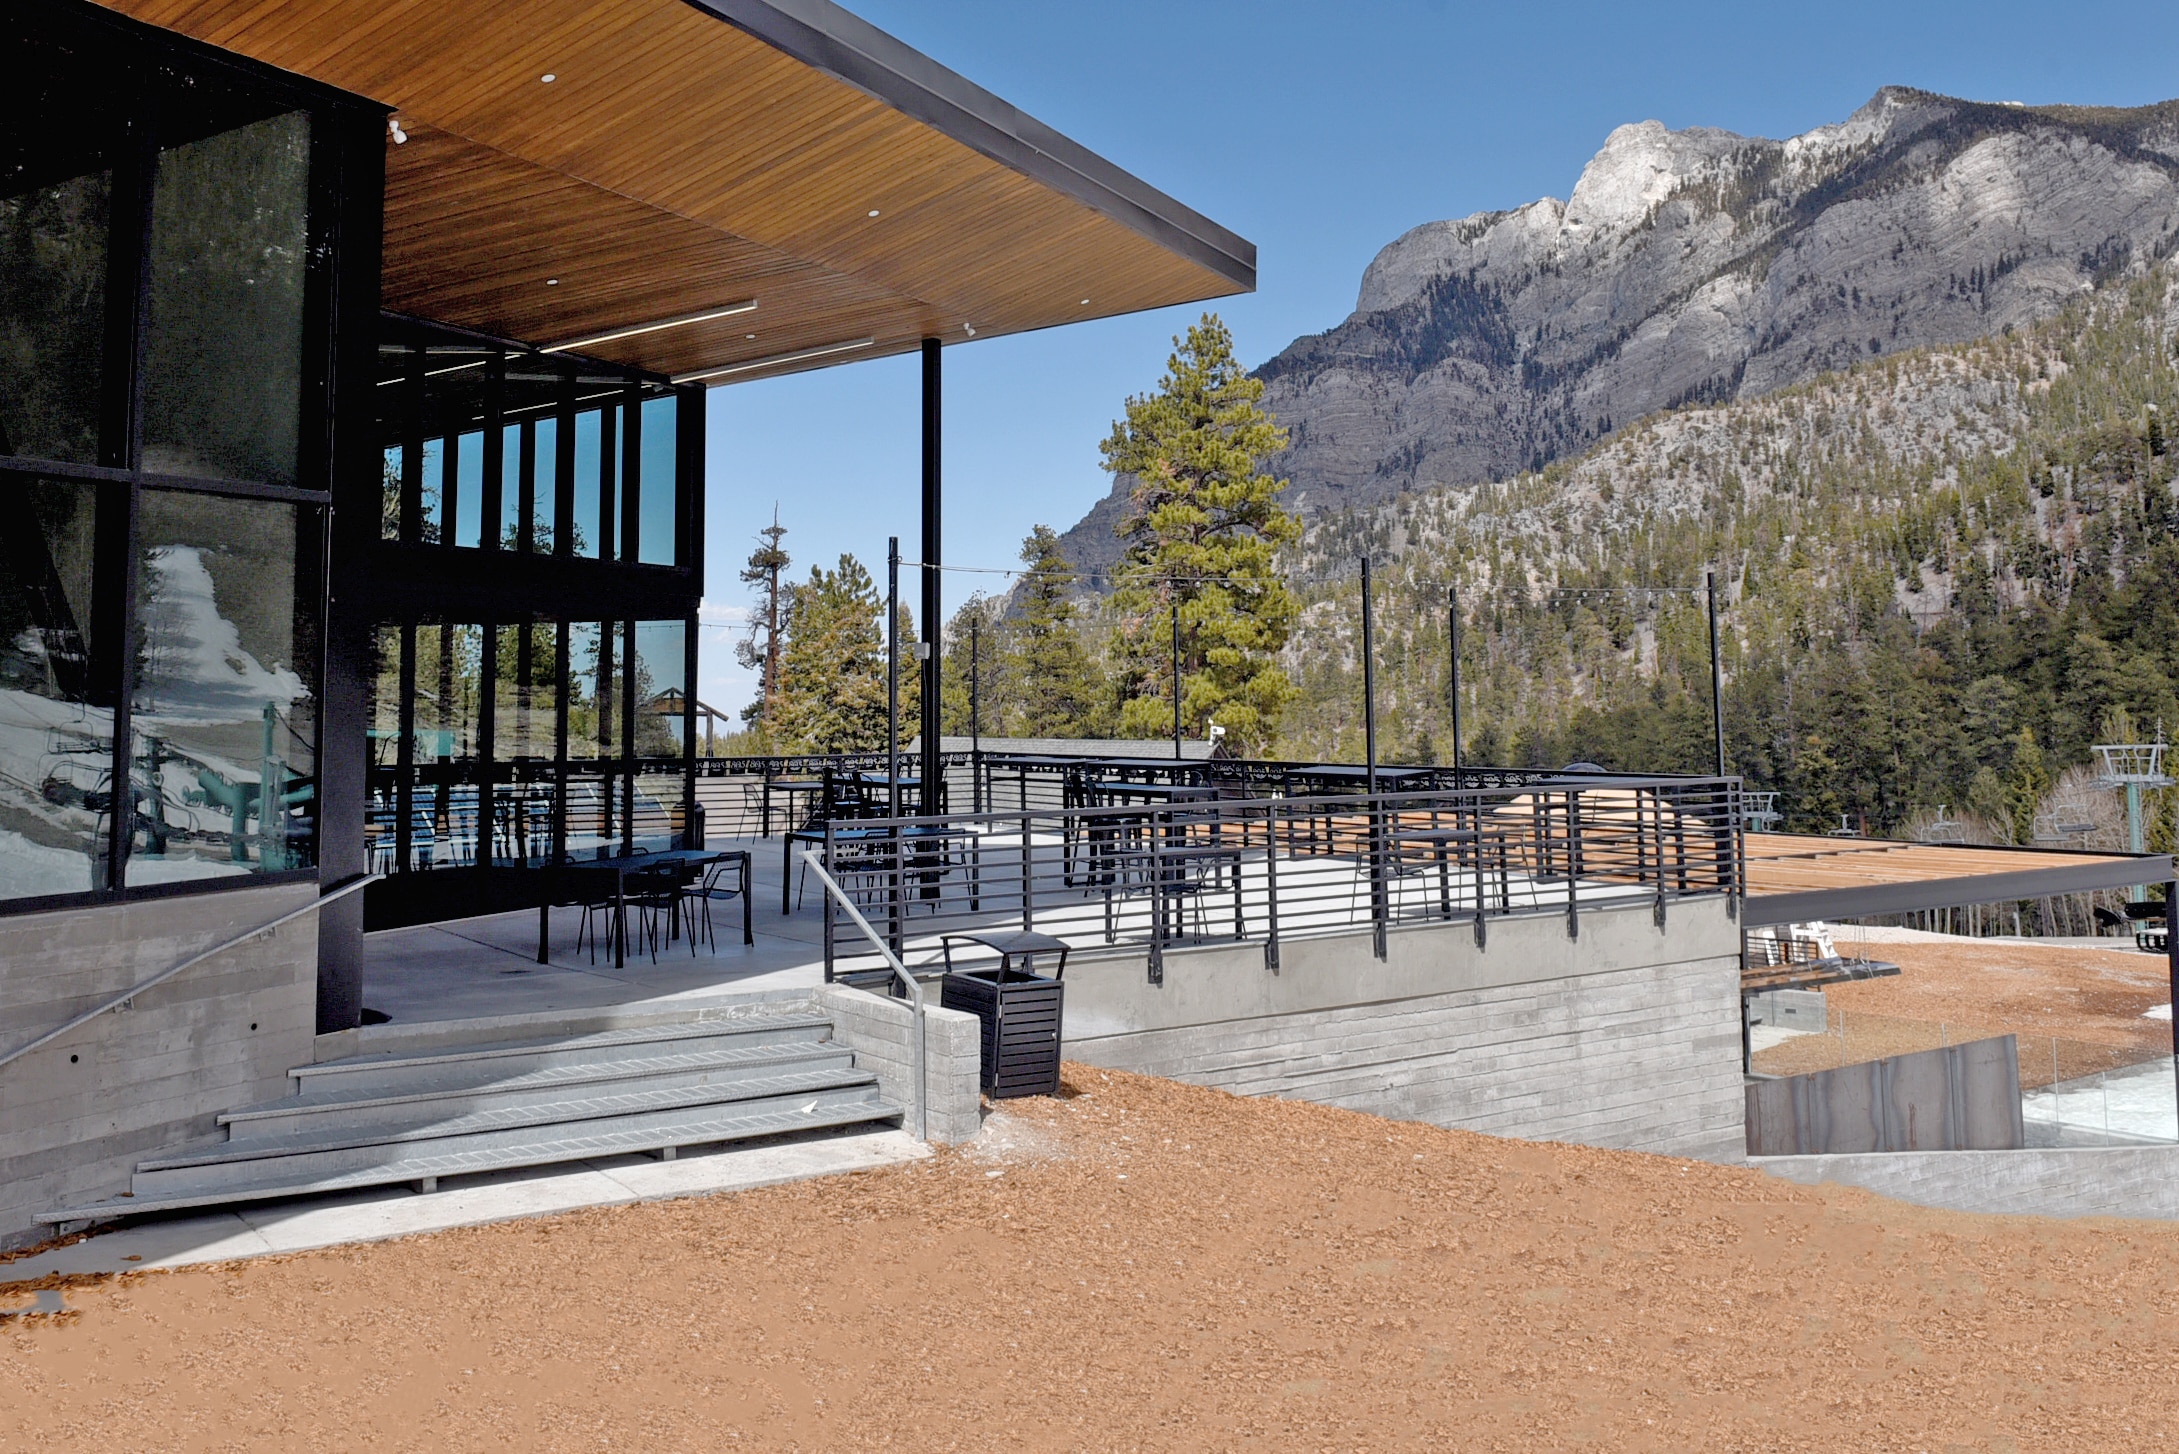 Mountain venue to host corporate groups